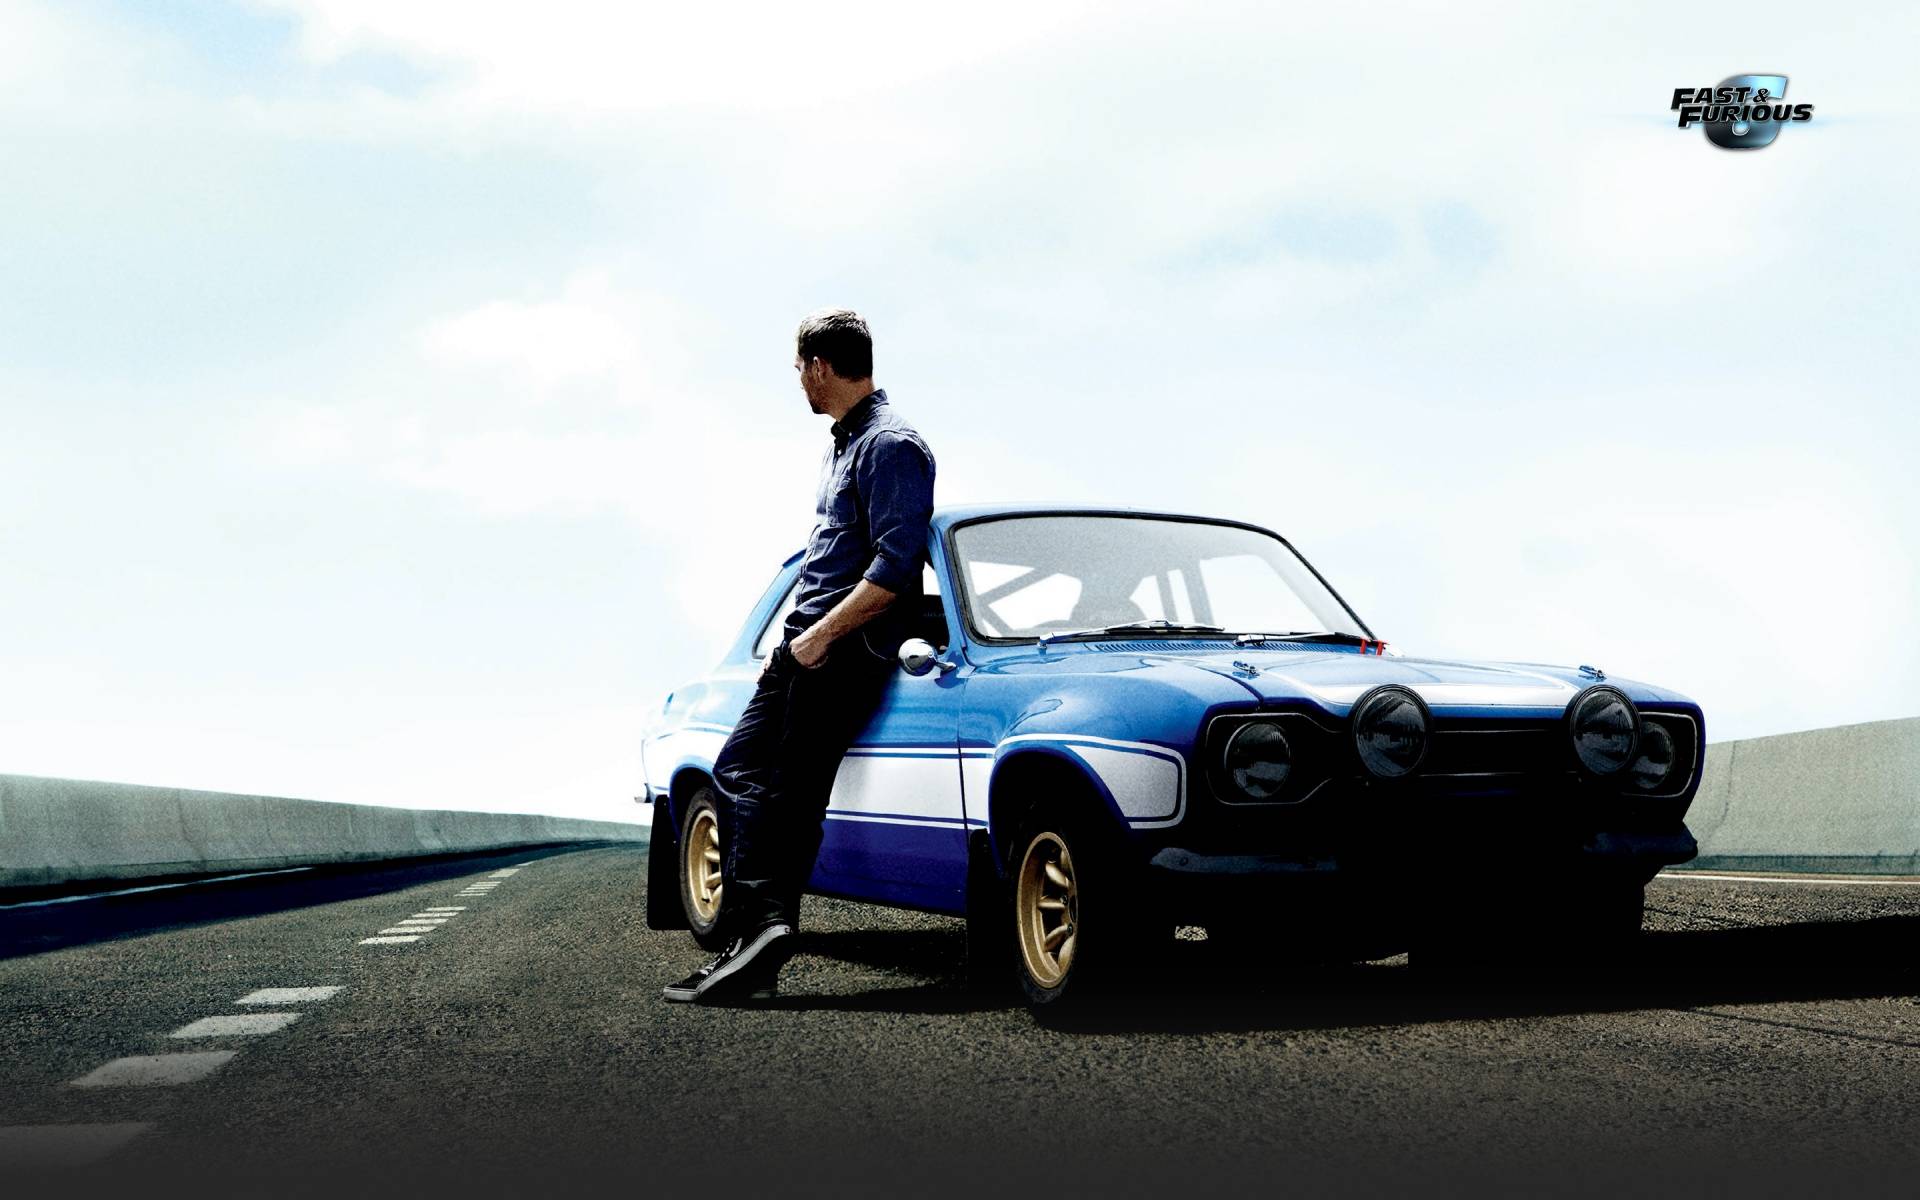 Fast and Furious 6 Cars Wallpaper Free Fast and Furious 6 Cars Background